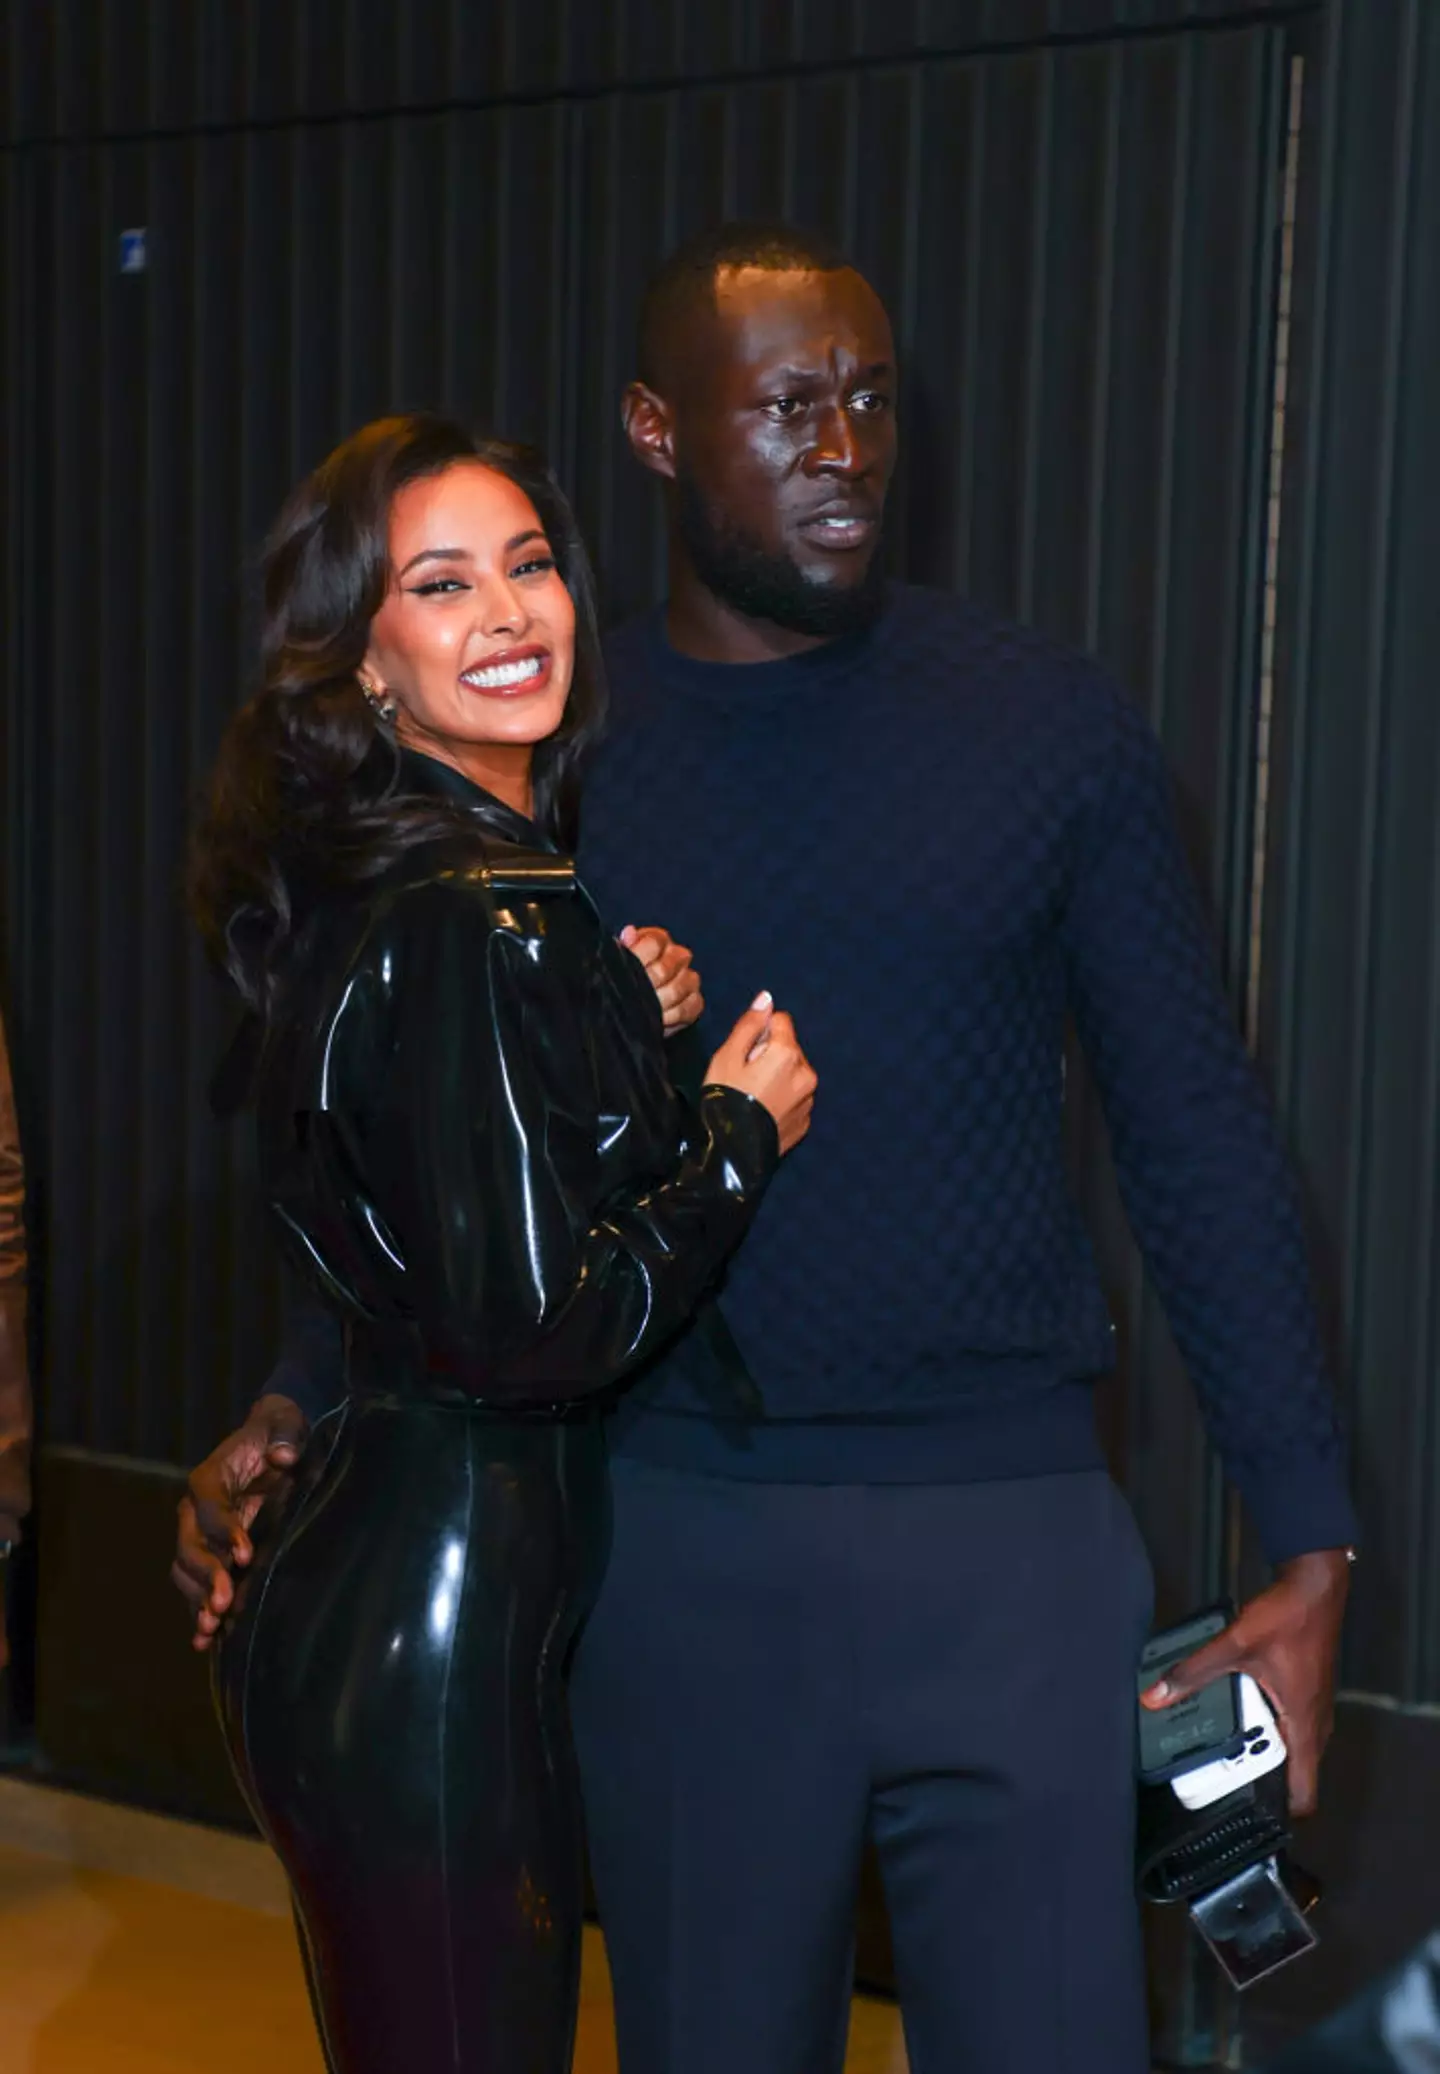 Fans are overjoyed that Maya Jama and Stormzy are back together.